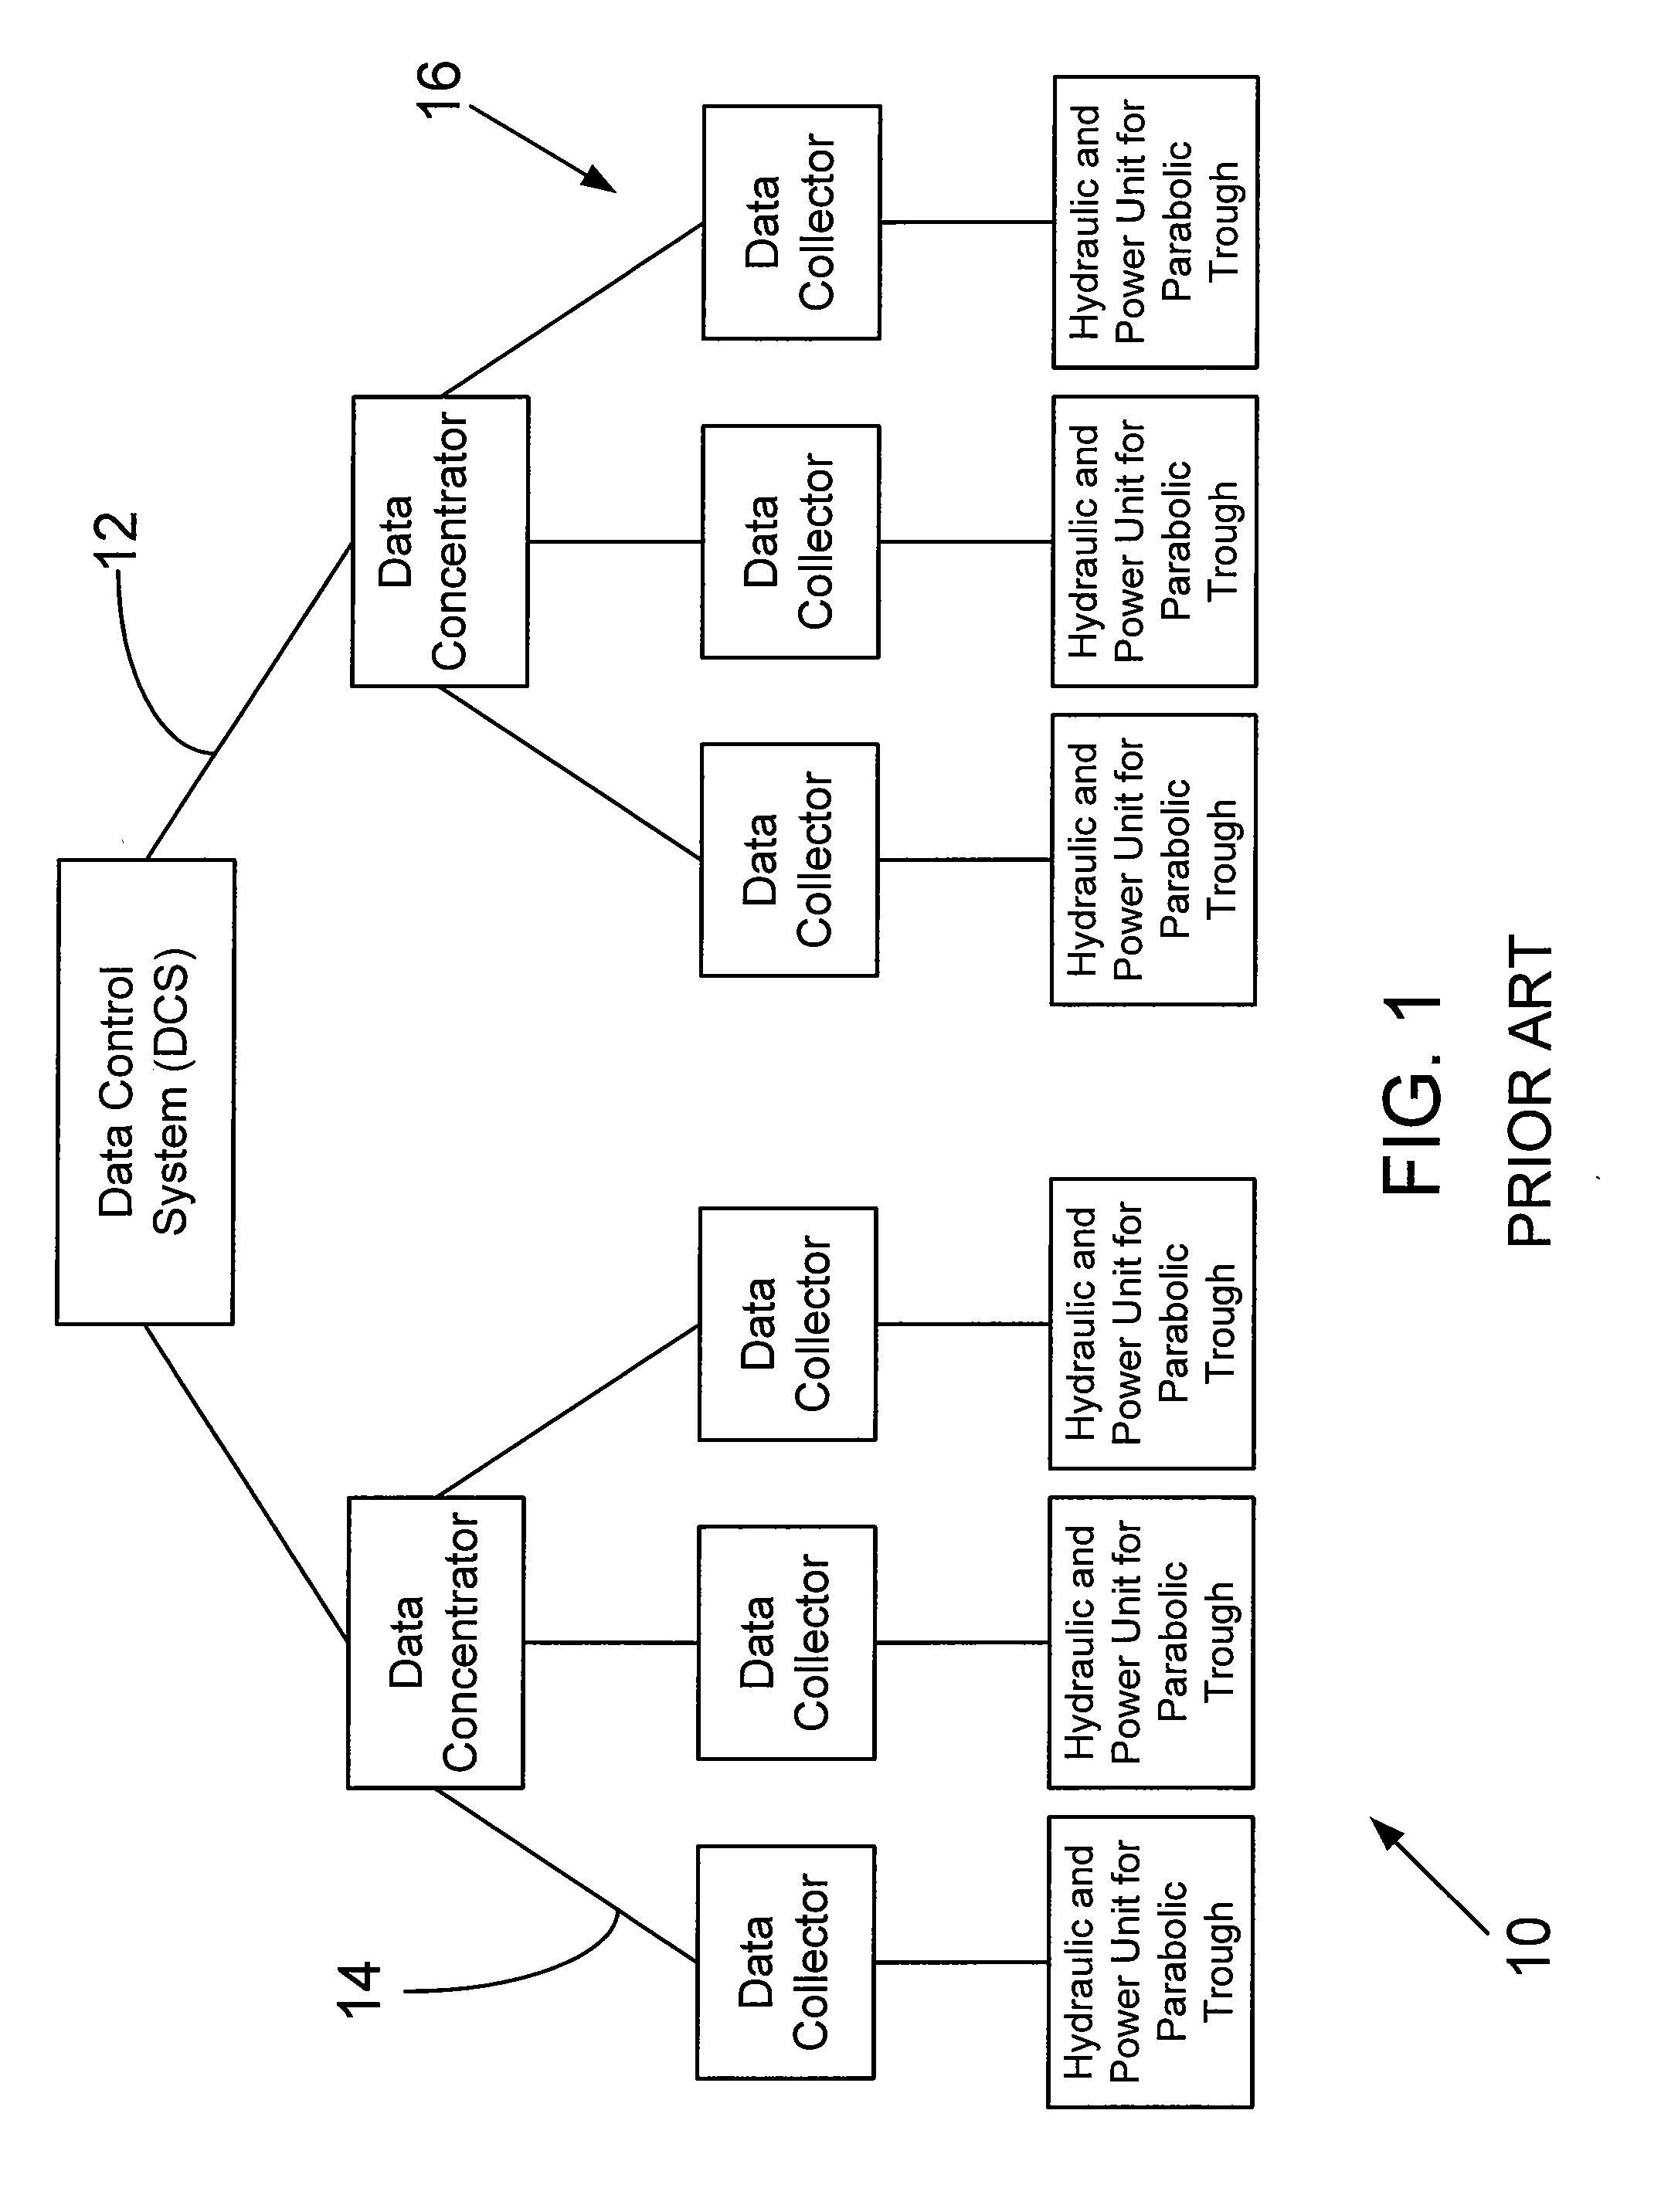 Method for robust wireless monitoring and tracking of solar trackers in commercial solar power plants